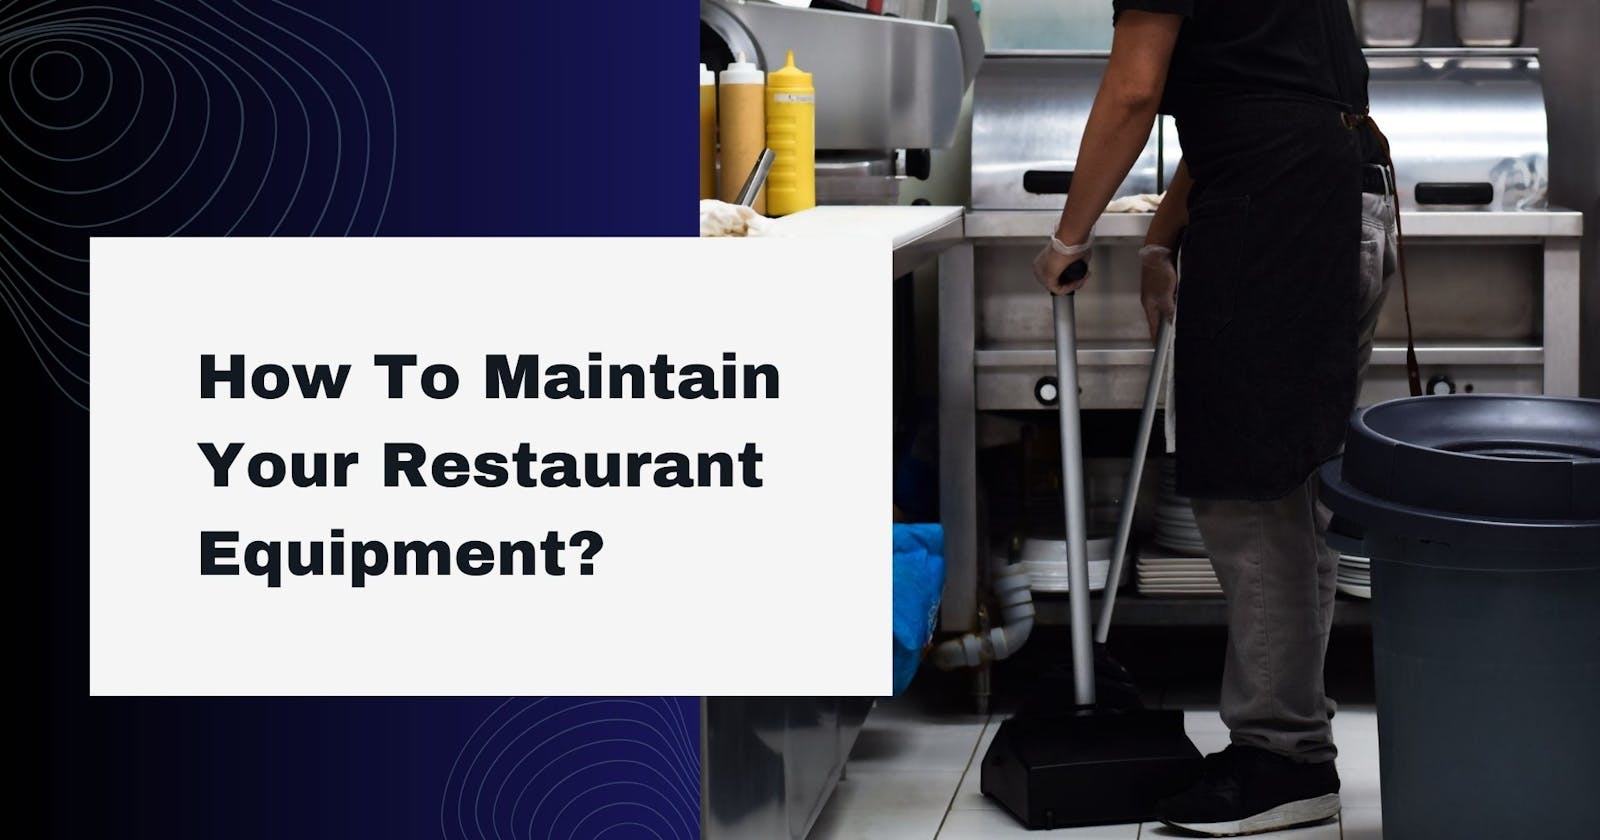 How To Maintain Your Restaurant Equipment?